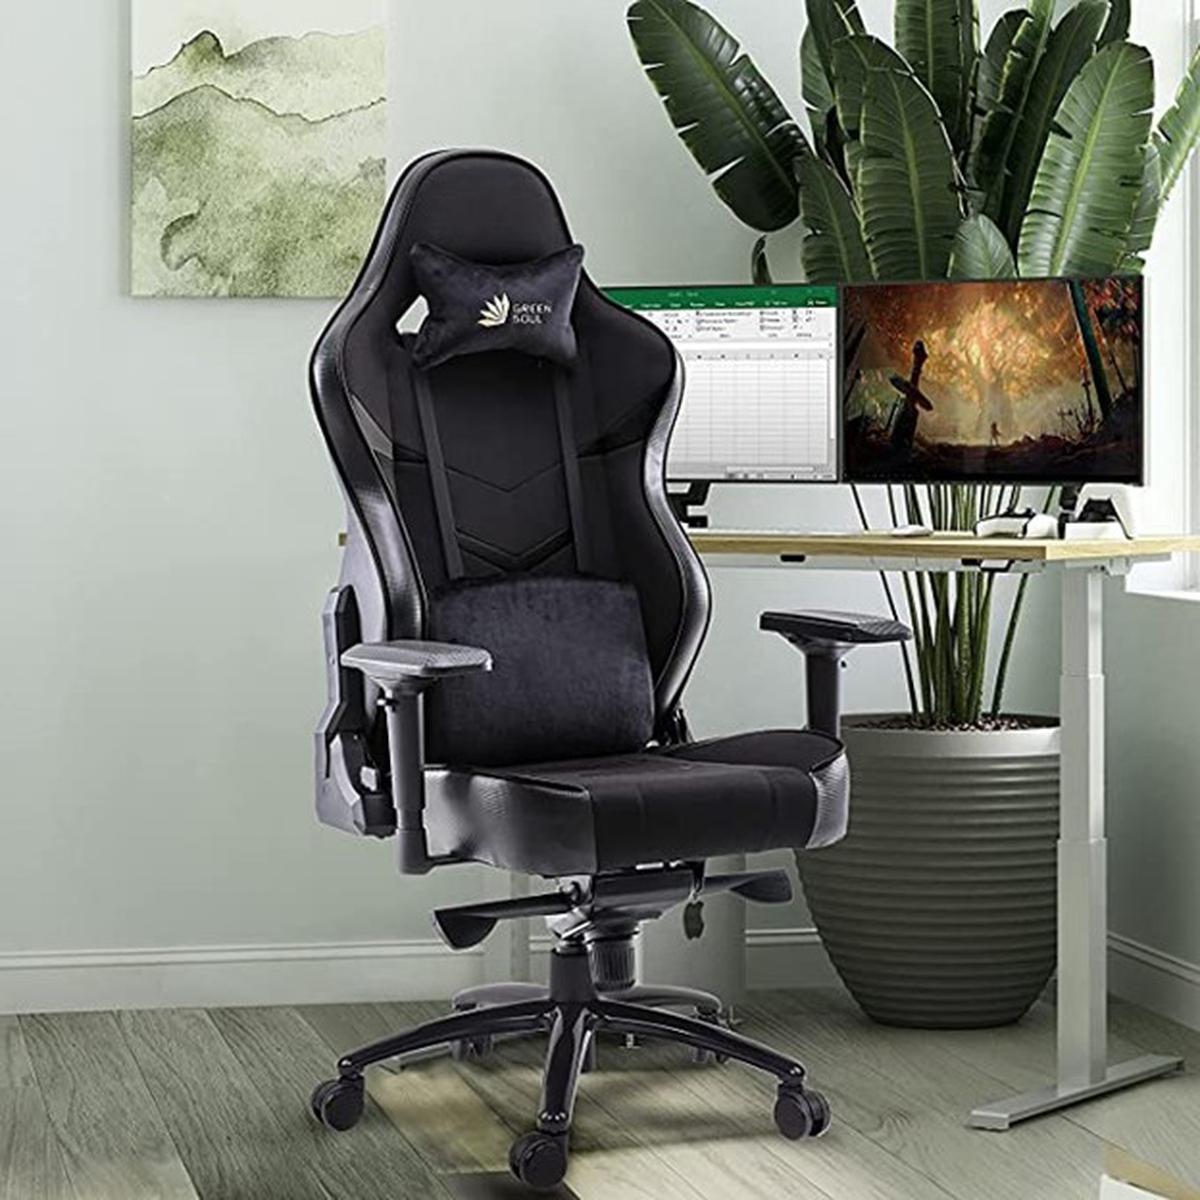 Best Office Chairs - The Hindu